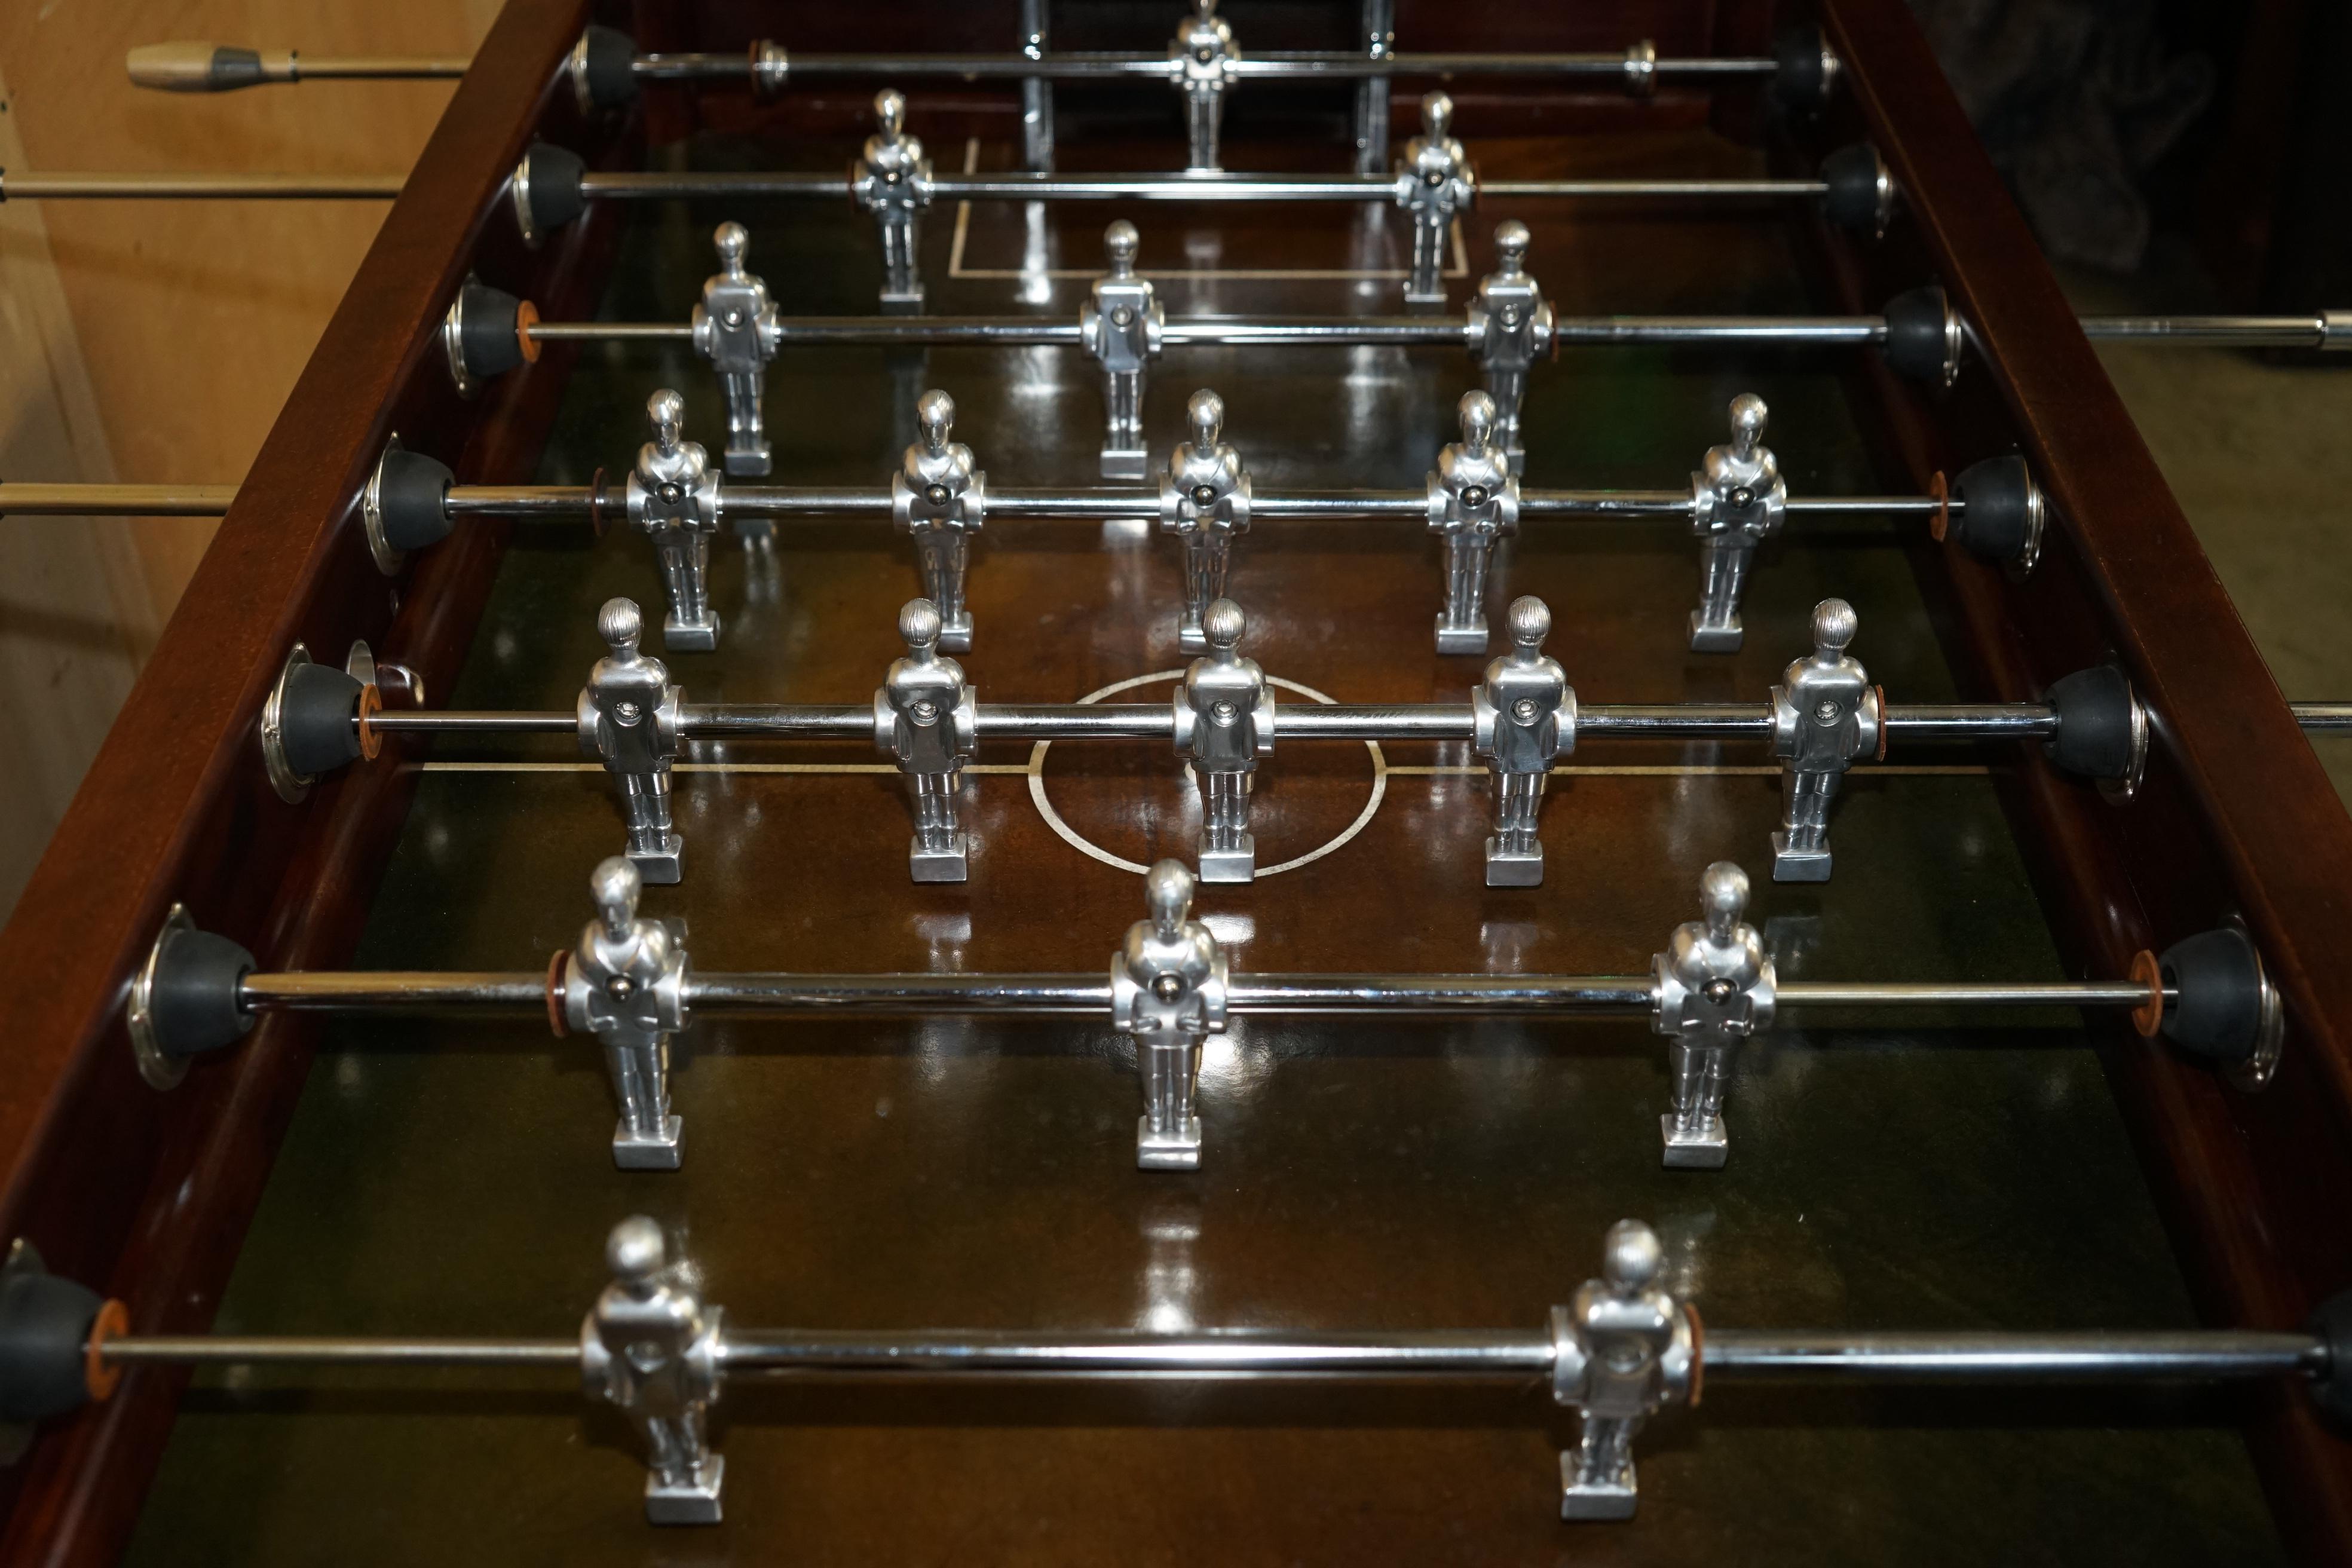 Metal ART DECO BABYFOOT TOULET EST 1857 FOOTBALL OR FOOSBALL TABLE WiTH CHROME PLAYERS